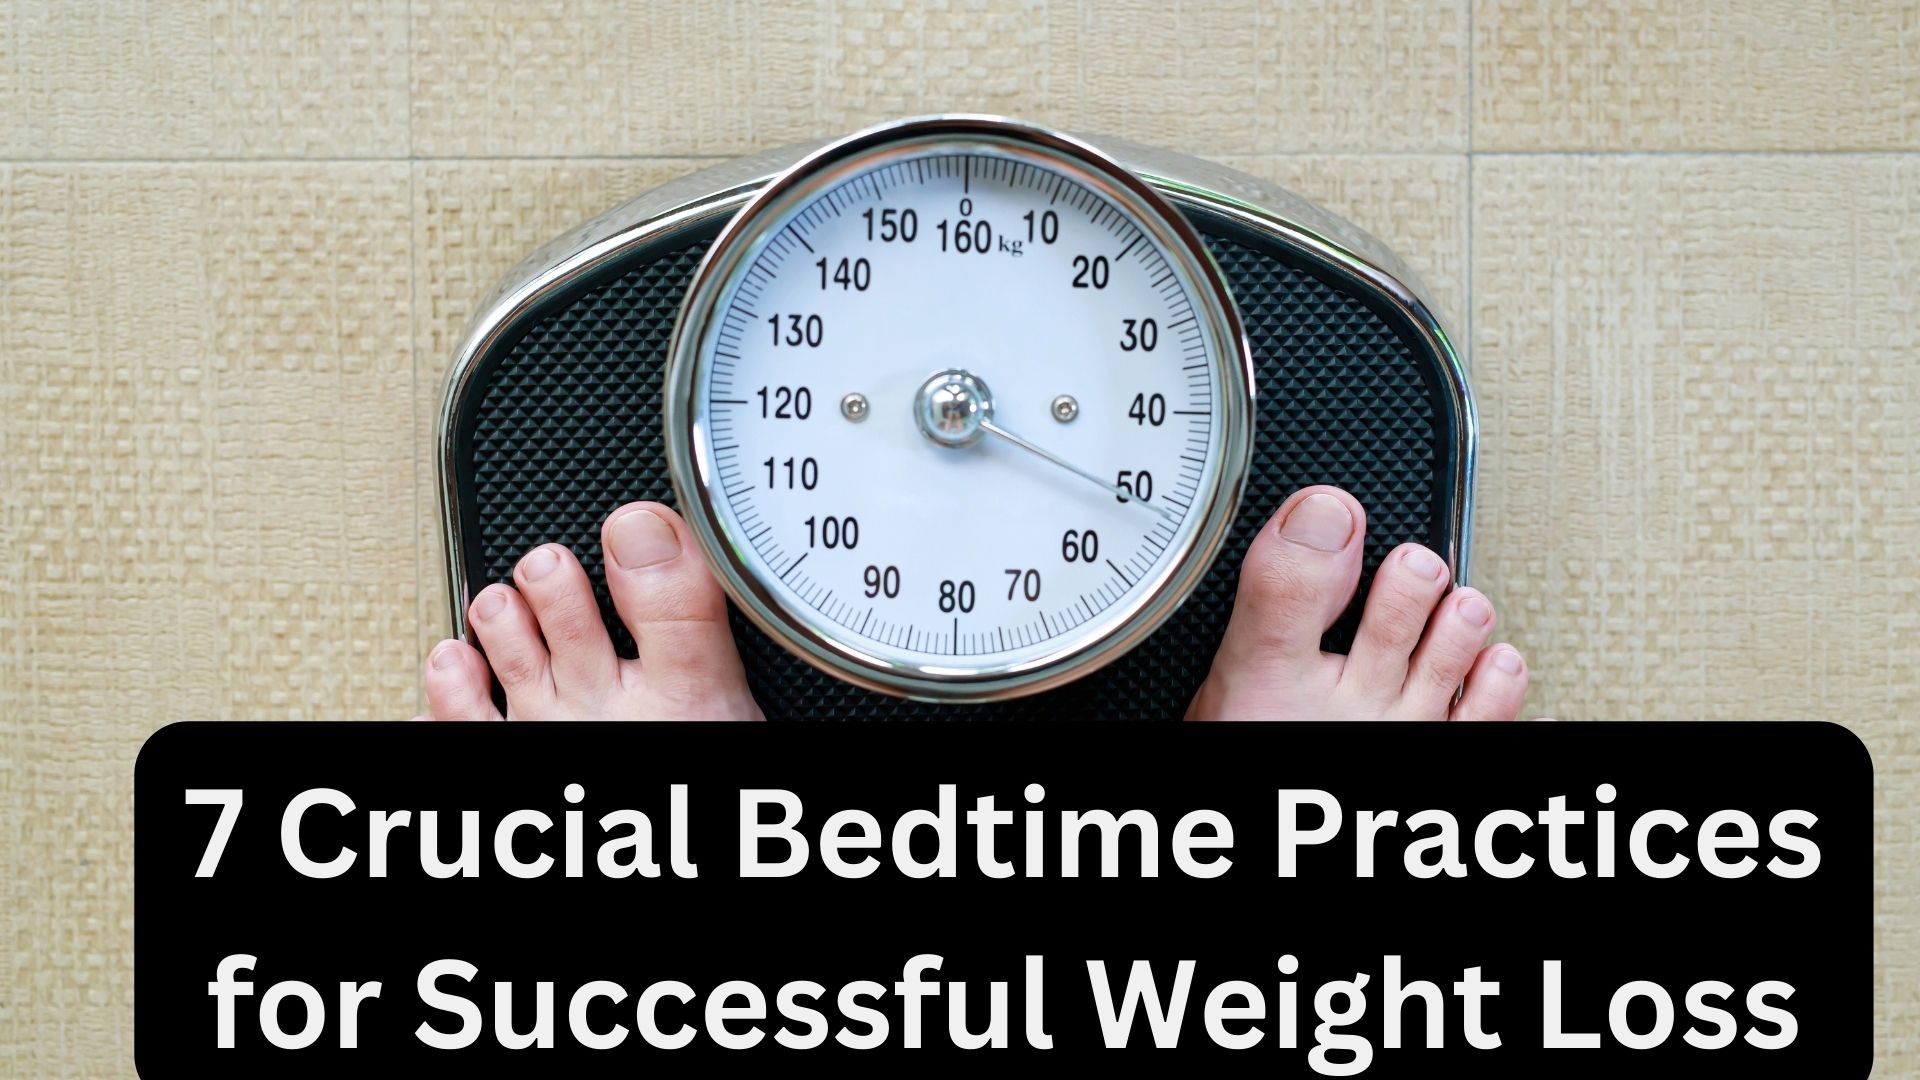 7 Crucial Bedtime Practices for Successful Weight Loss